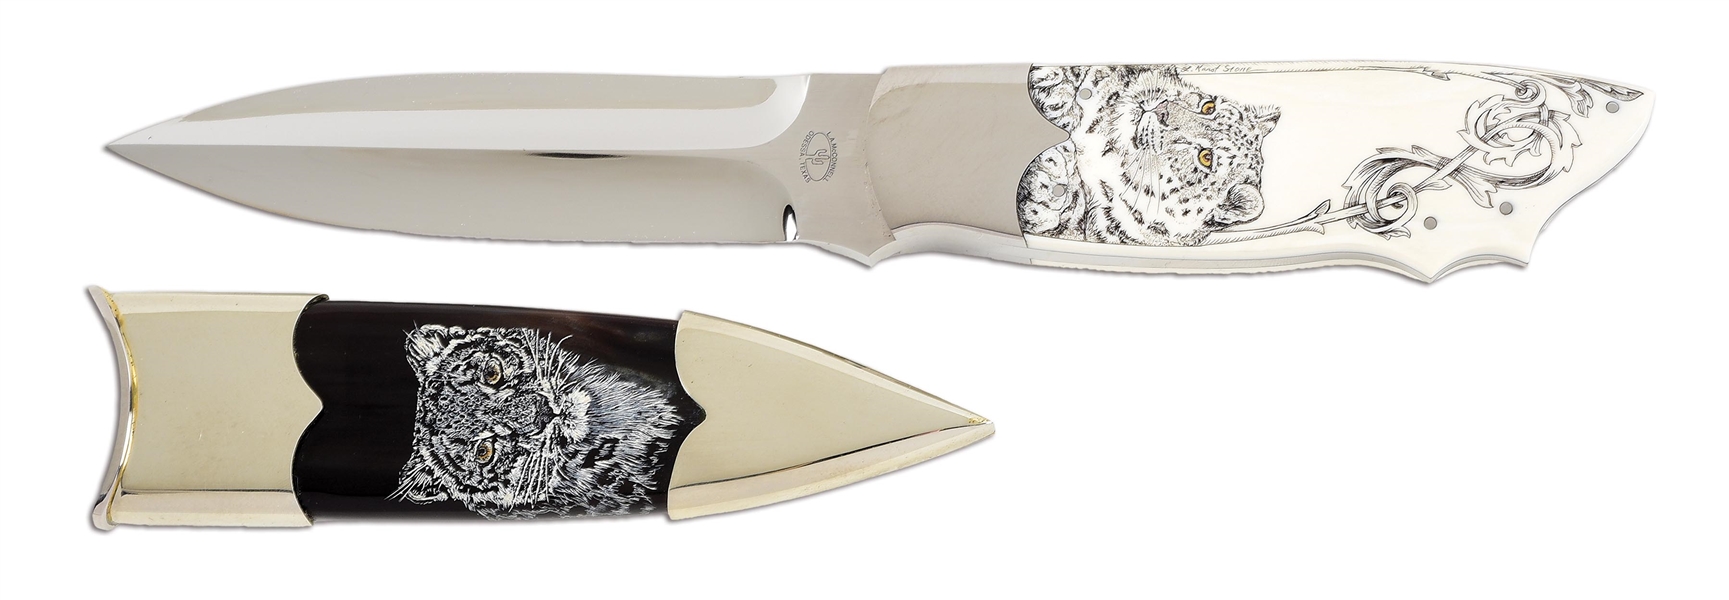 L.A. MCCONNELL SNOW LEOPARD DAGGER WITH EBONY SCABBARD AND SCRIMSHAWED IVORY GRIPS BY LINDA KARST STONE.